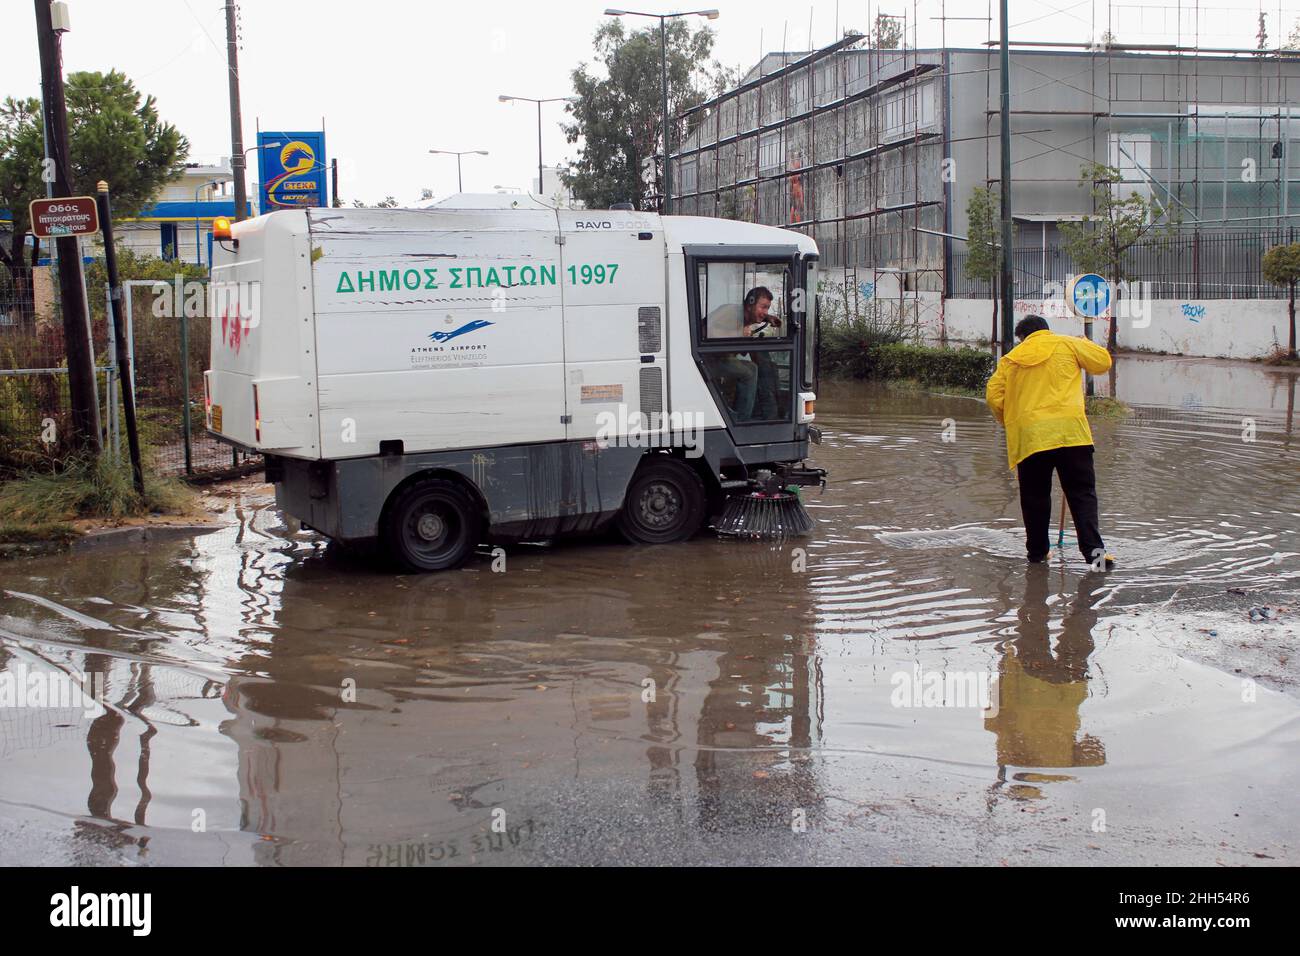 Cleaning up flooded street after heavy rainfall - Spata, Attica, Greece, October 31 2019 Stock Photo